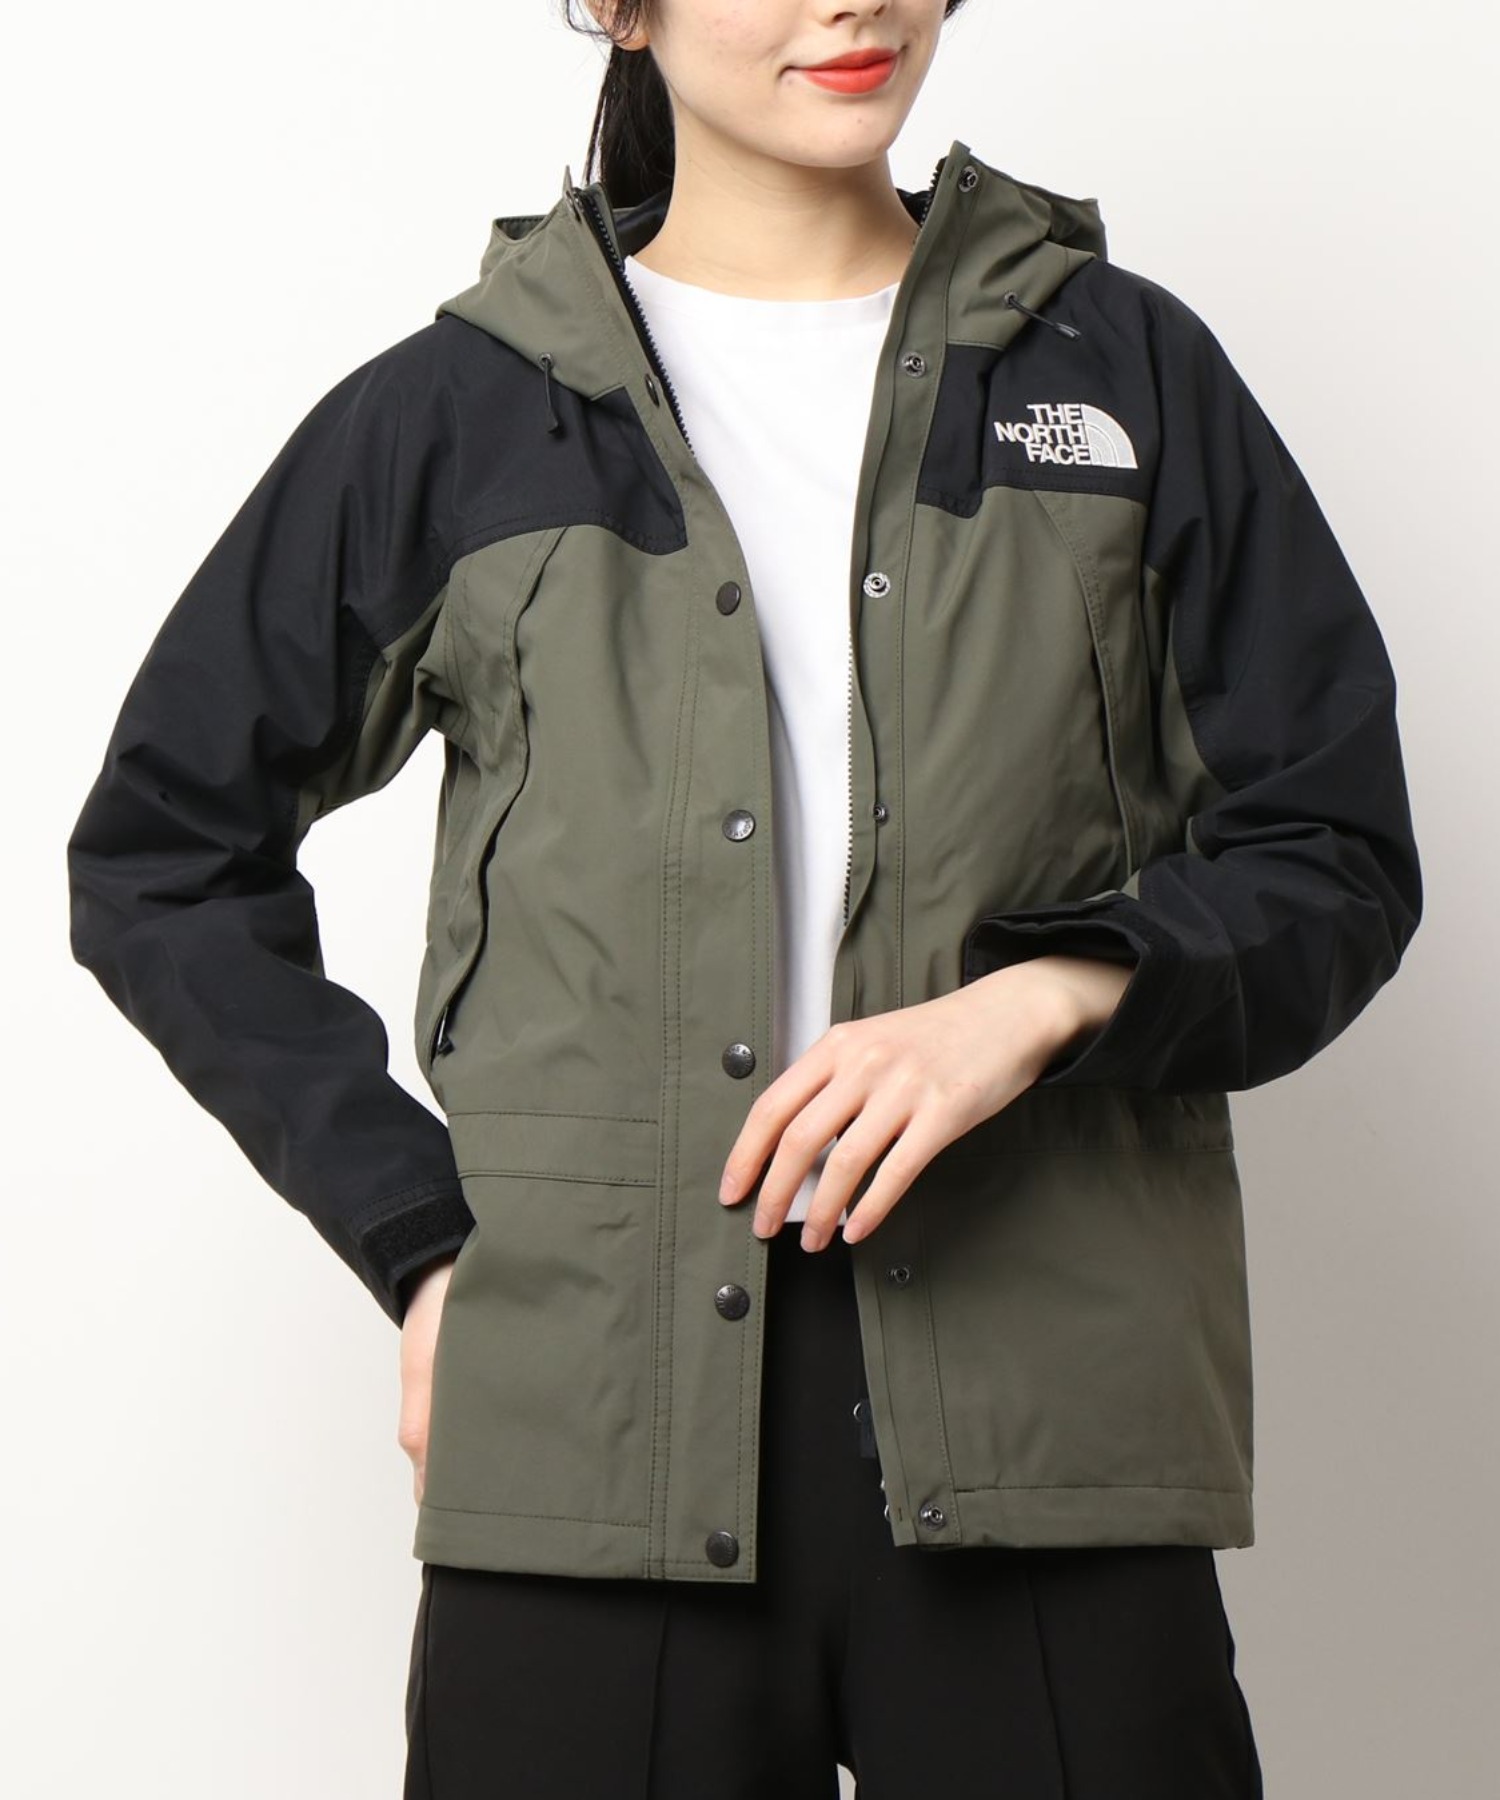 THE NORTH FACETHE FACE Mountain Jacket 94％以上節約 【正規品質保証】 NPW61831 Light